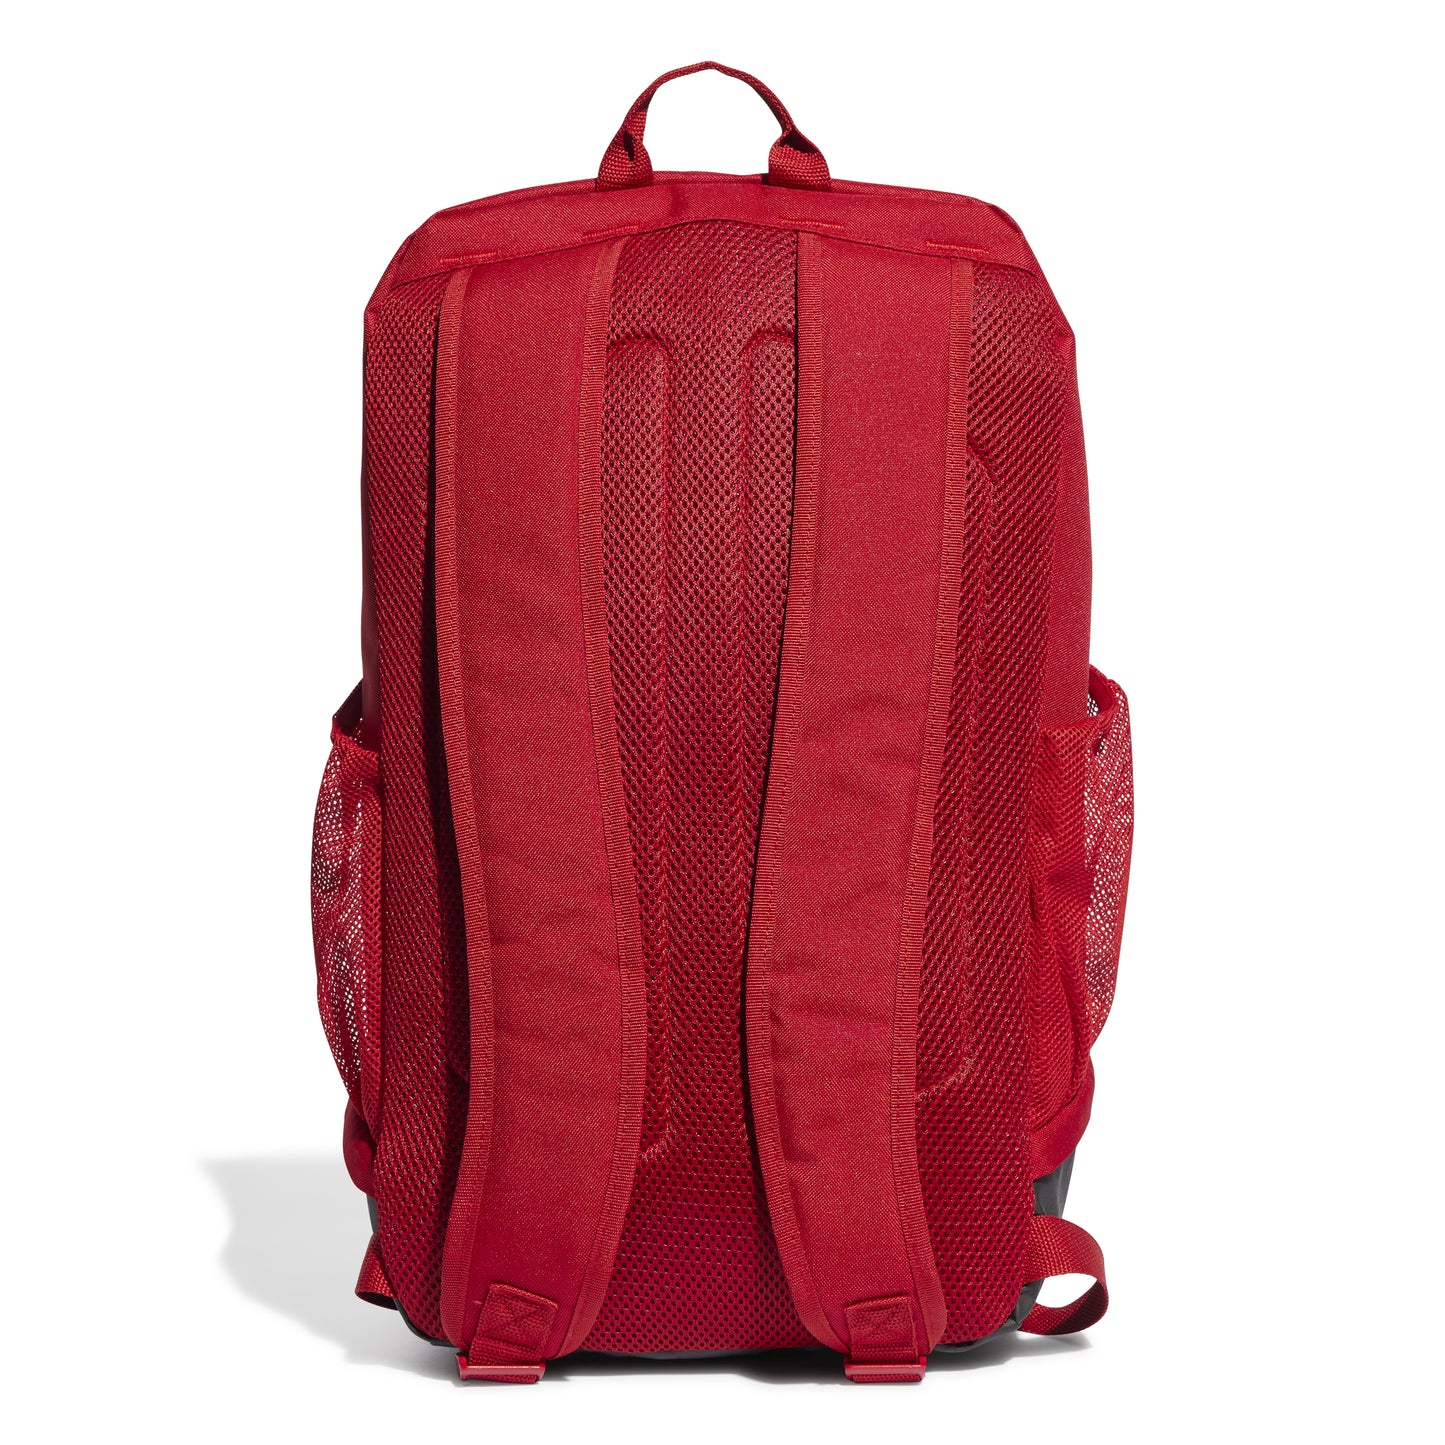 Nomads Academy Players Backpack